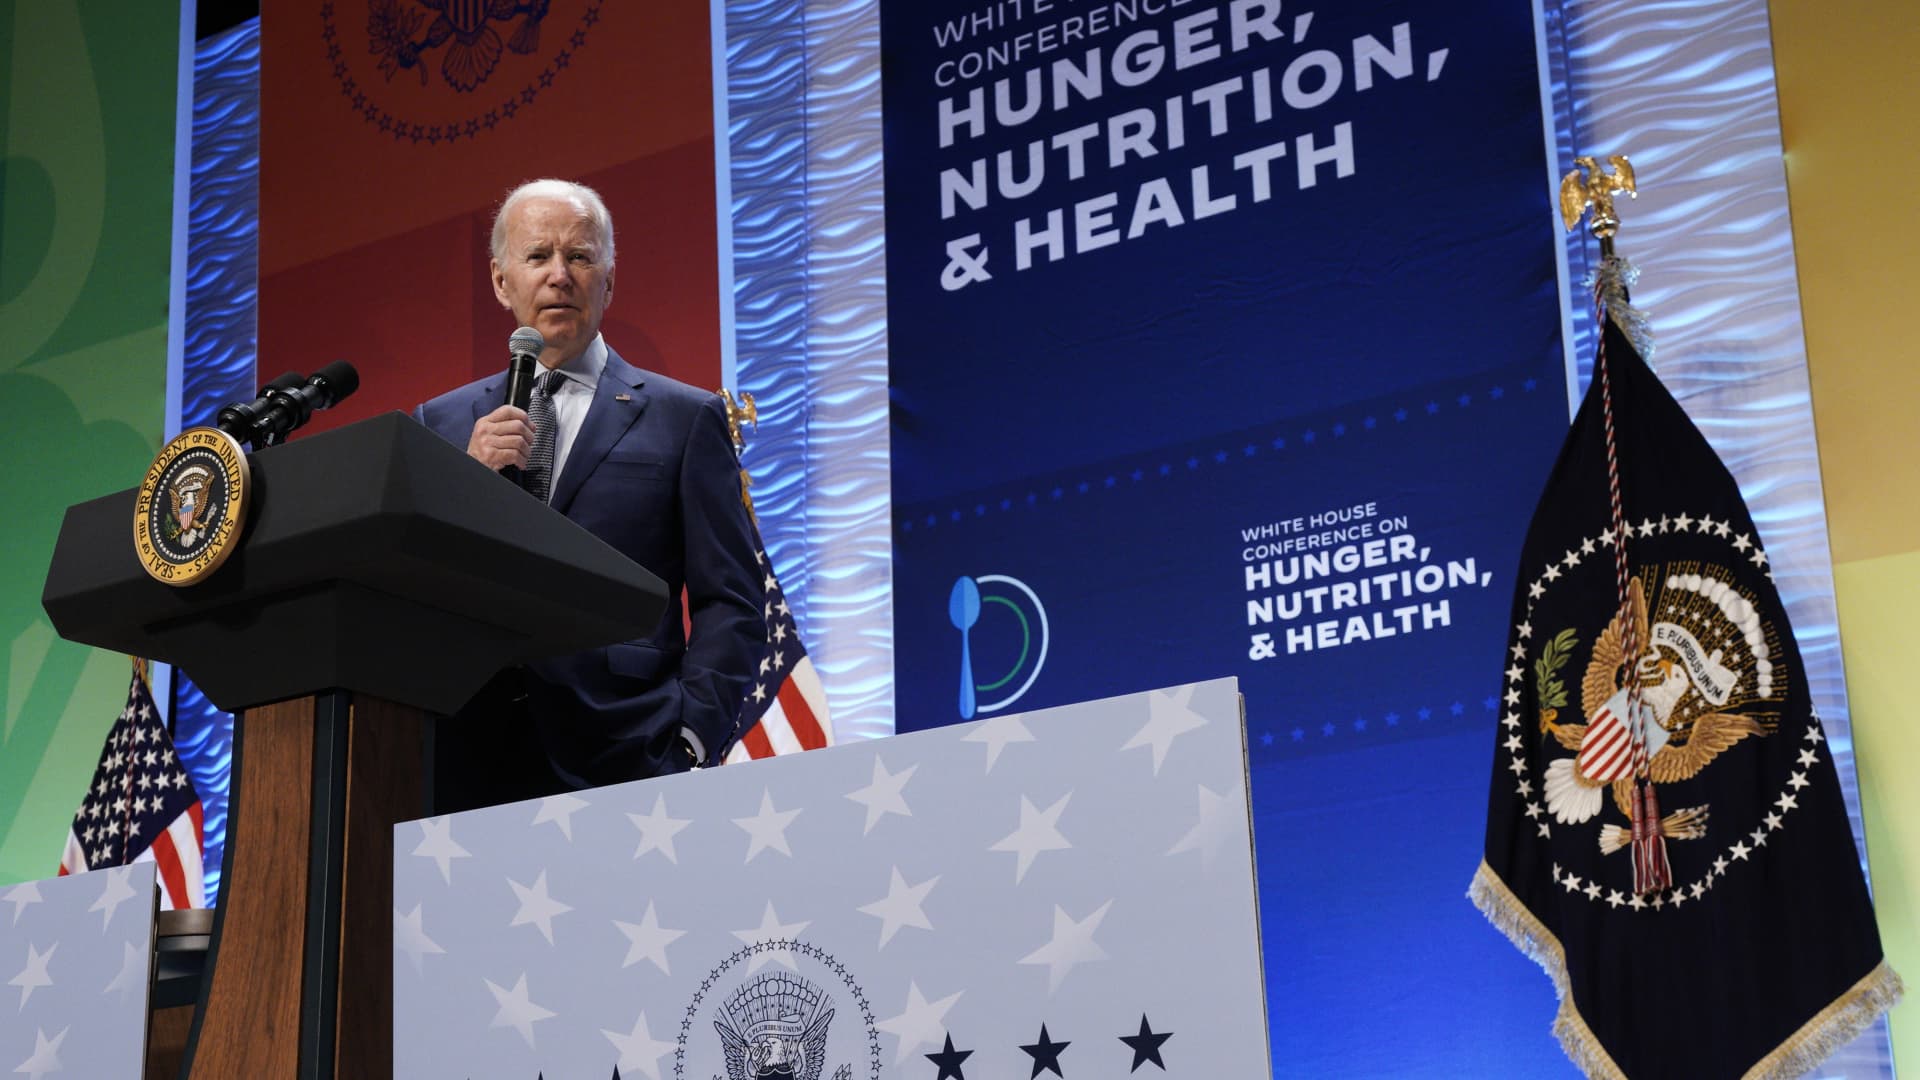 President Joe Biden speaks at the White House Conference On Hunger, Nutrition And Health in Washington, D.C., on Wednesday, Sept. 28.